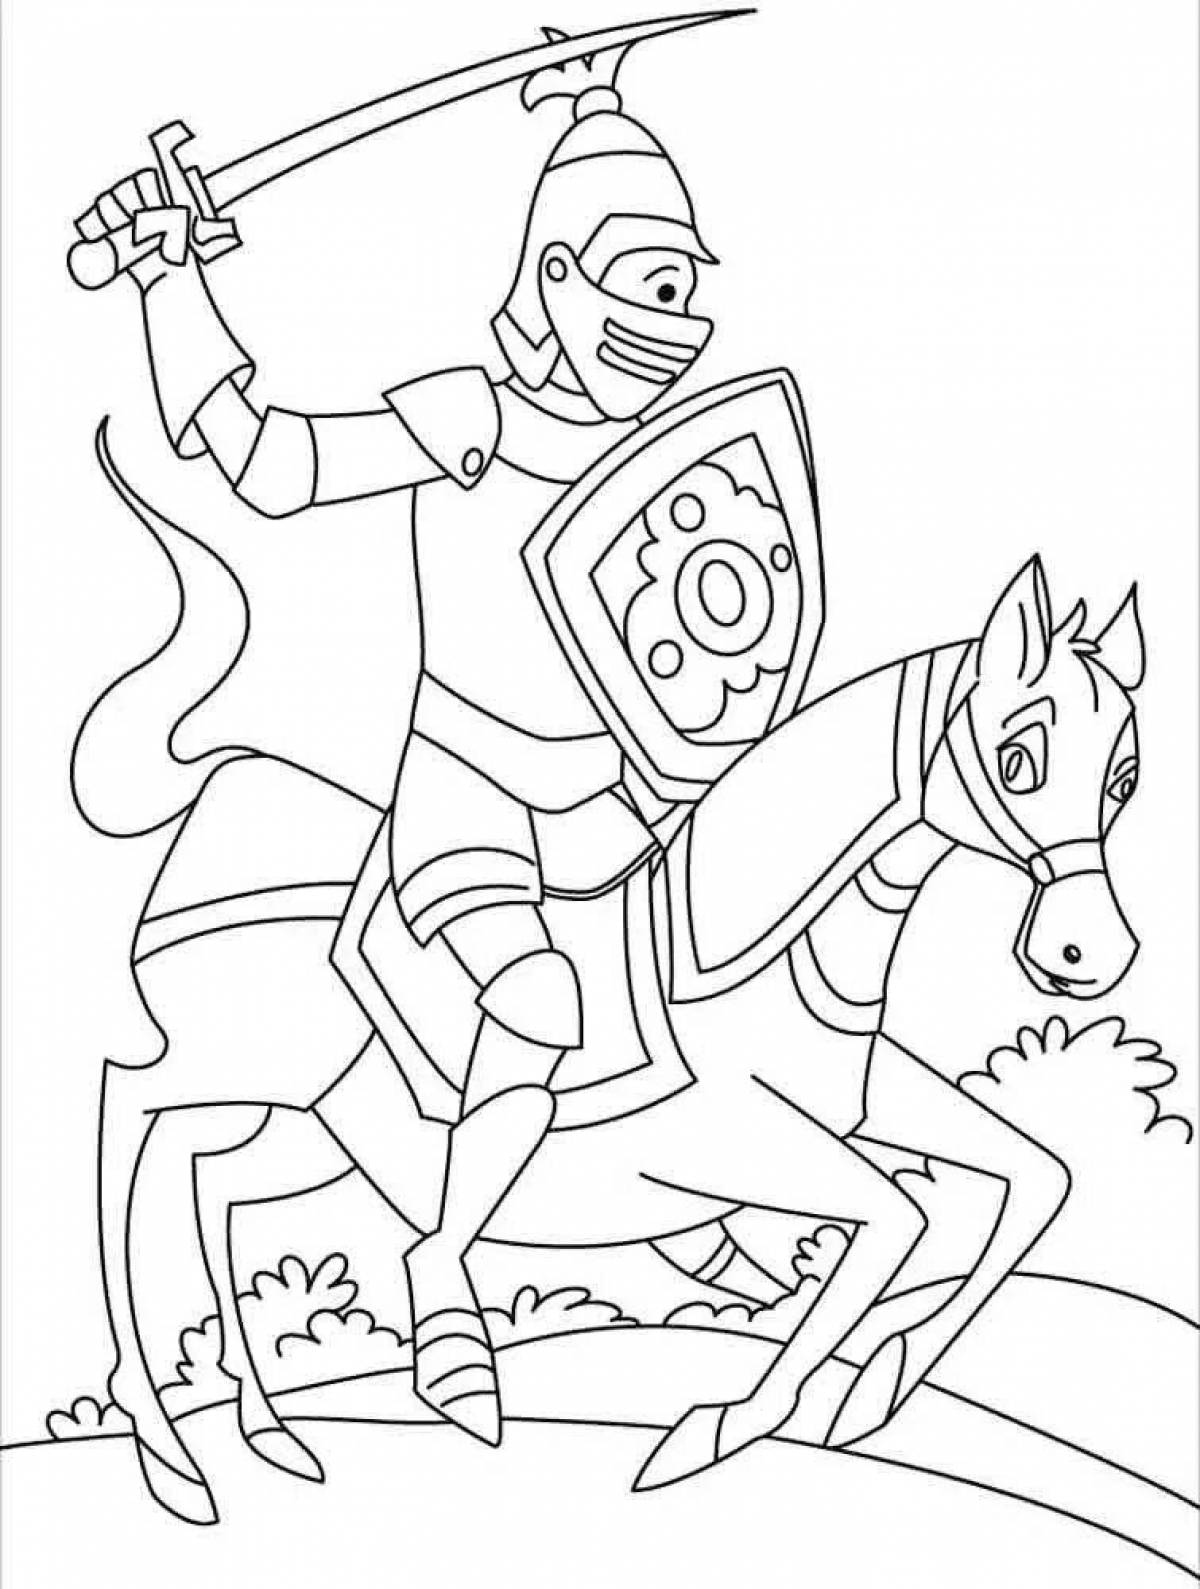 Courageous knight coloring book